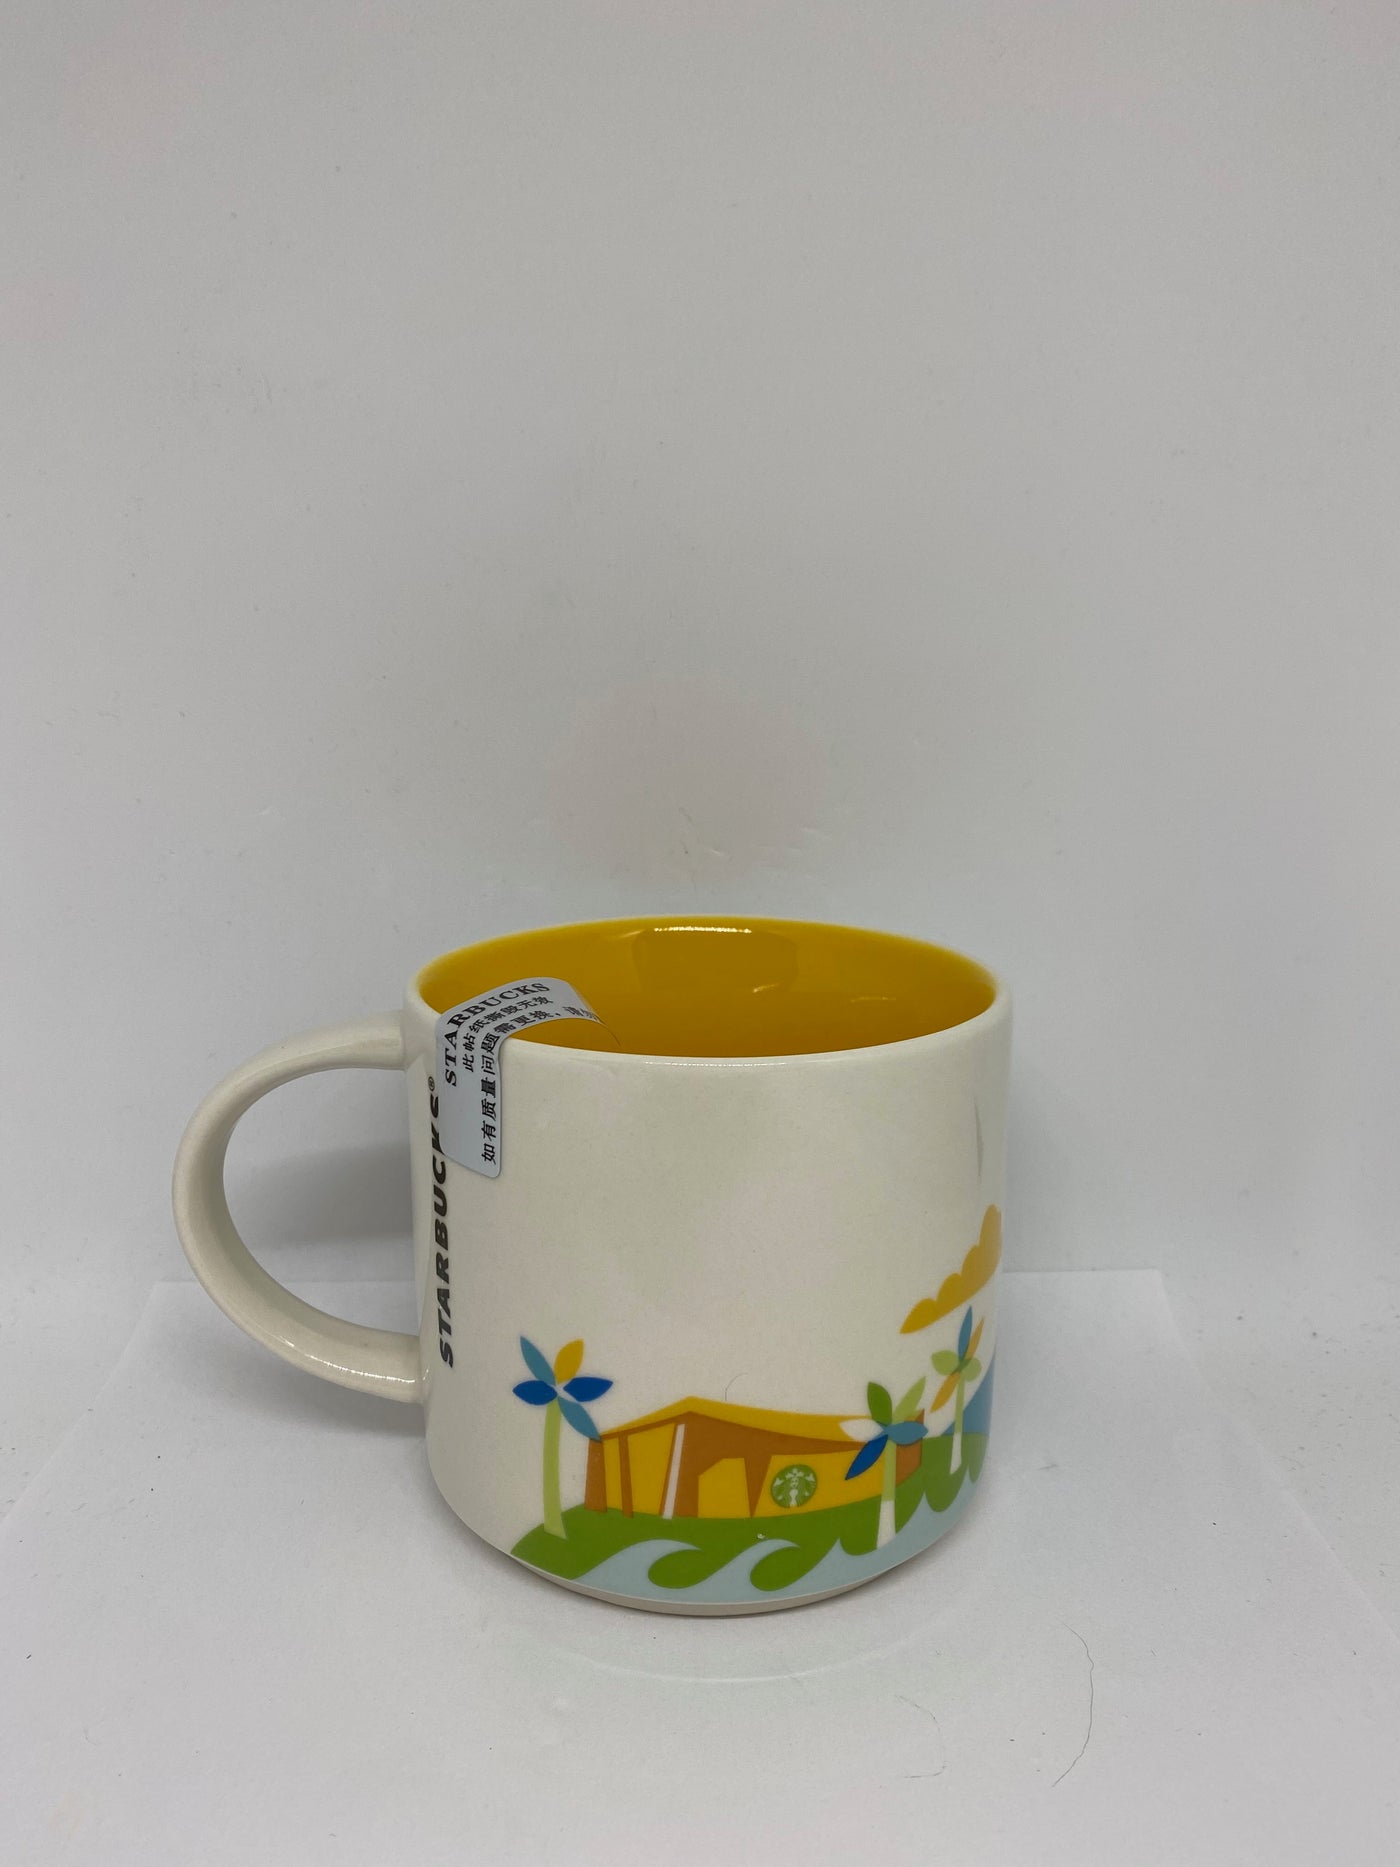 Starbucks You Are Here Collection Shenzhen China Ceramic Coffee Mug New With Box